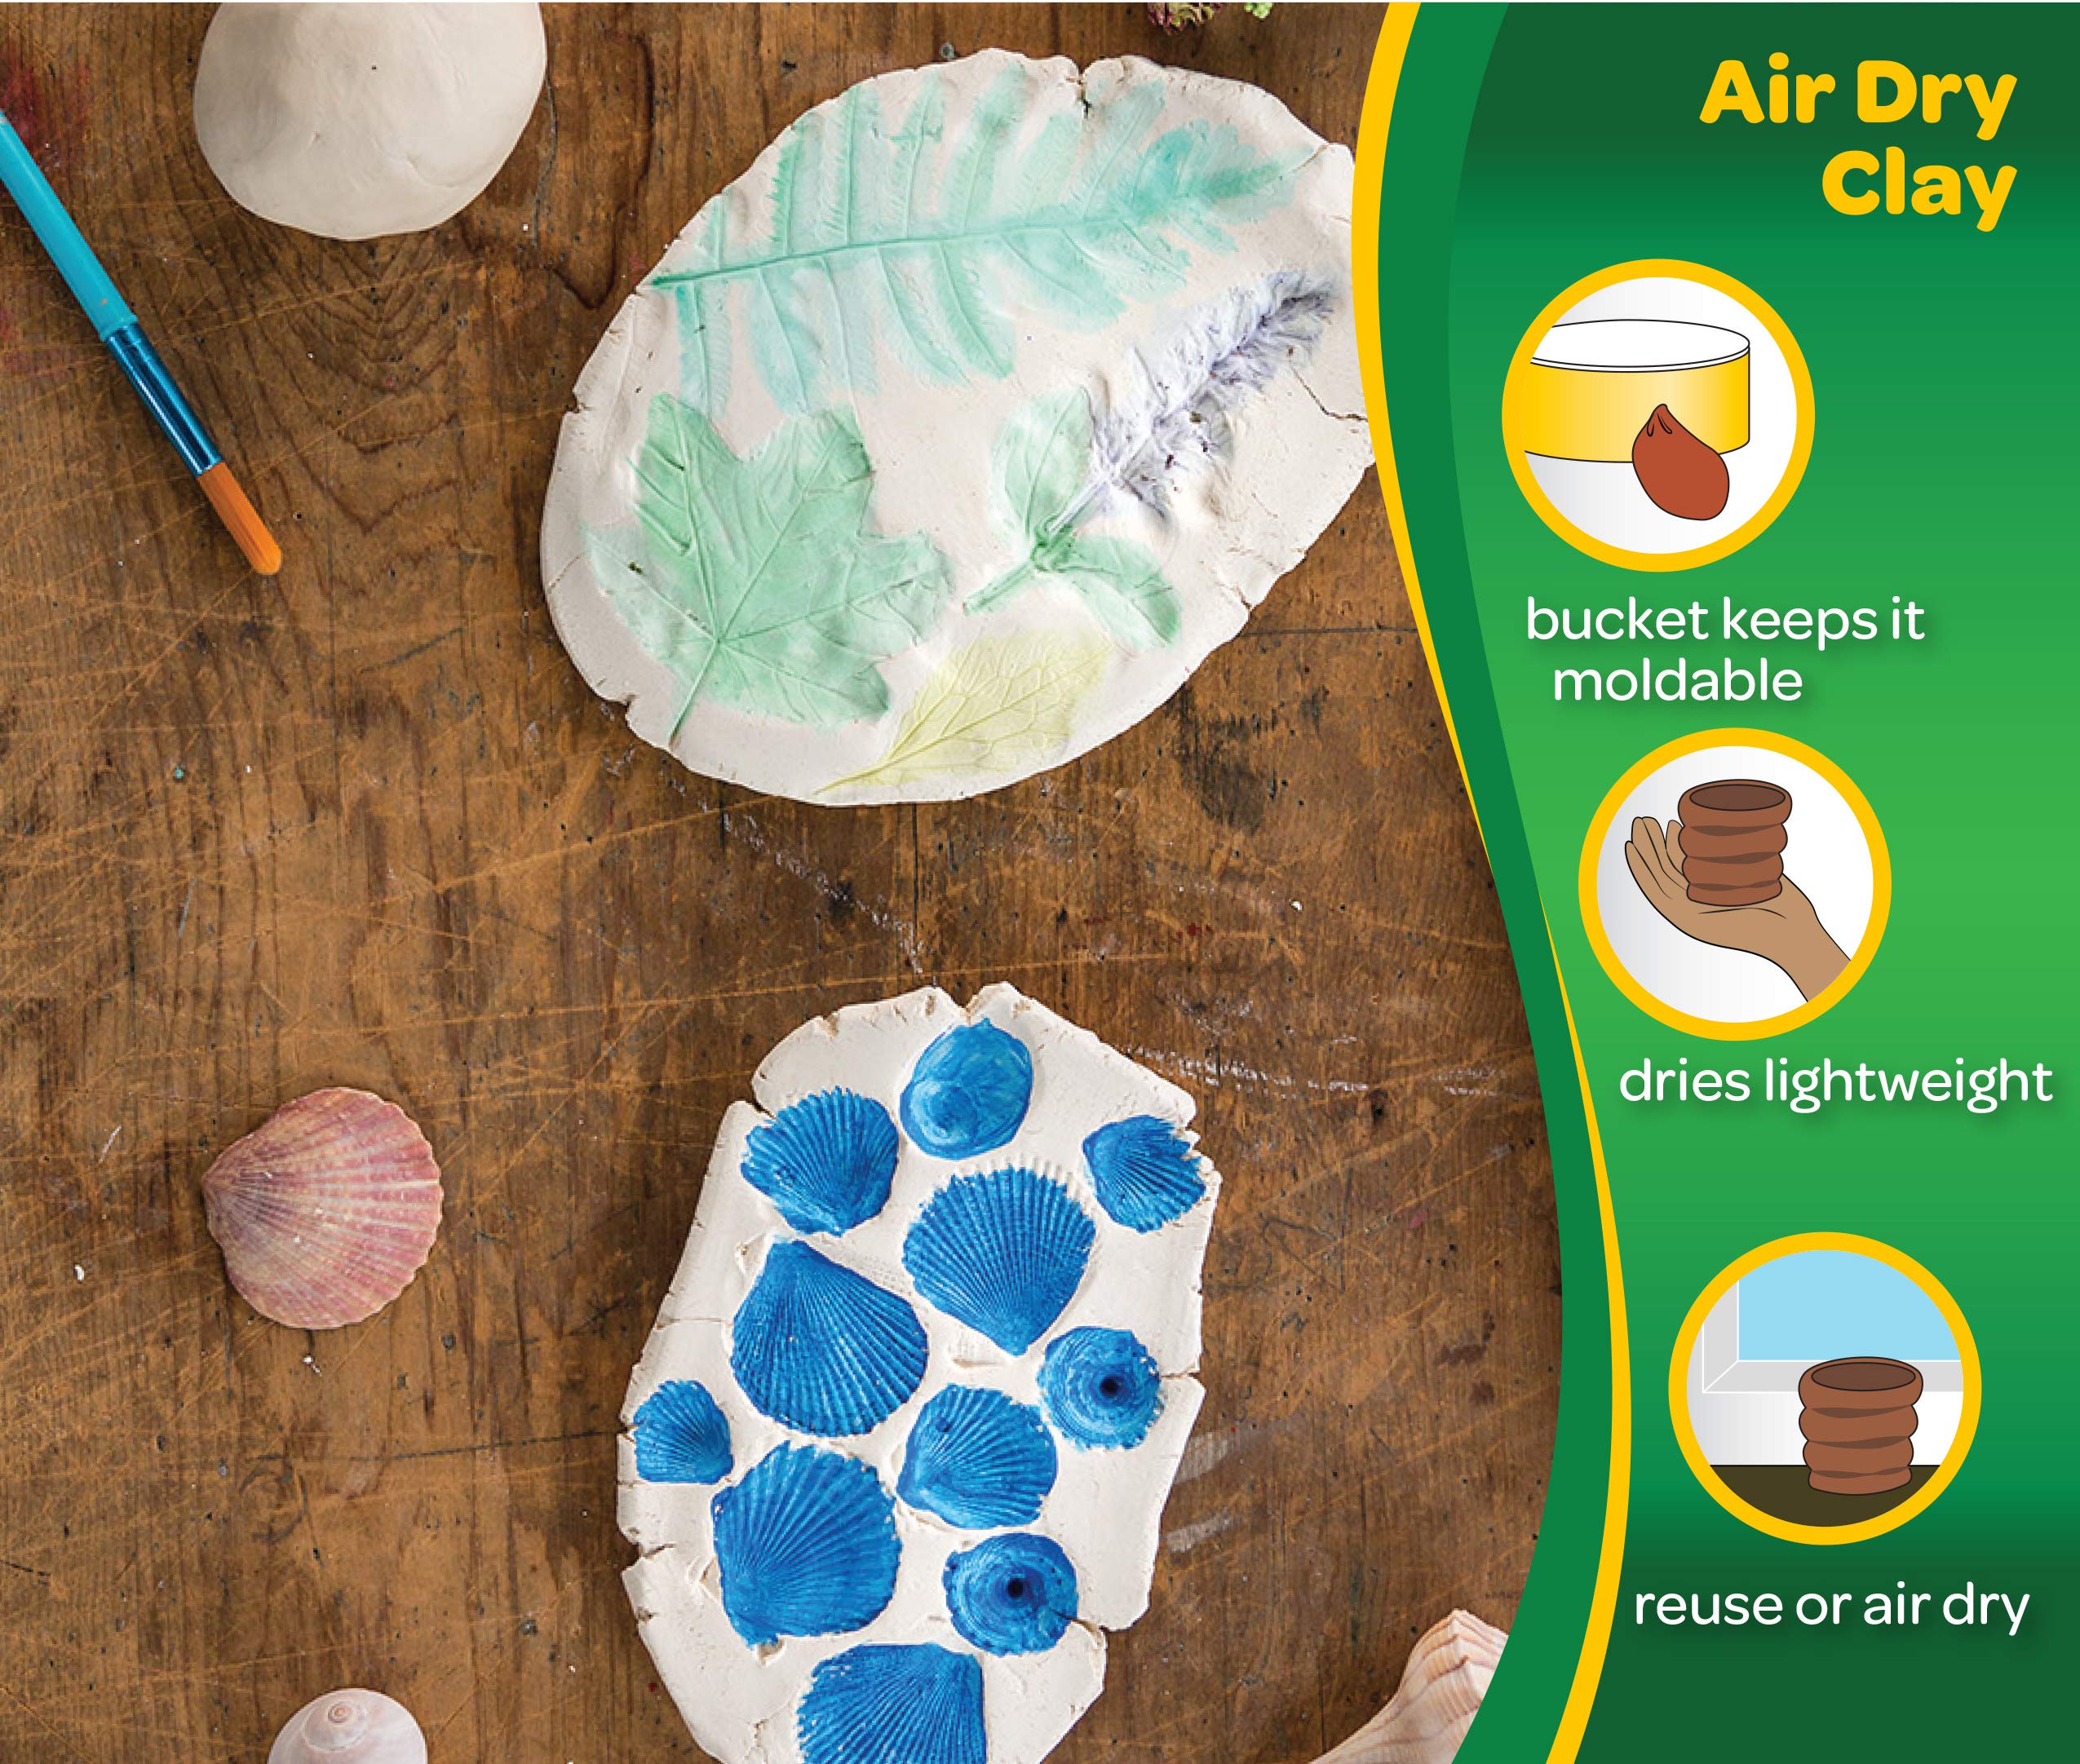 Crayola Air Dry Clay, White, 5Lb Bucket, No Bake Clay for Kids, Gift